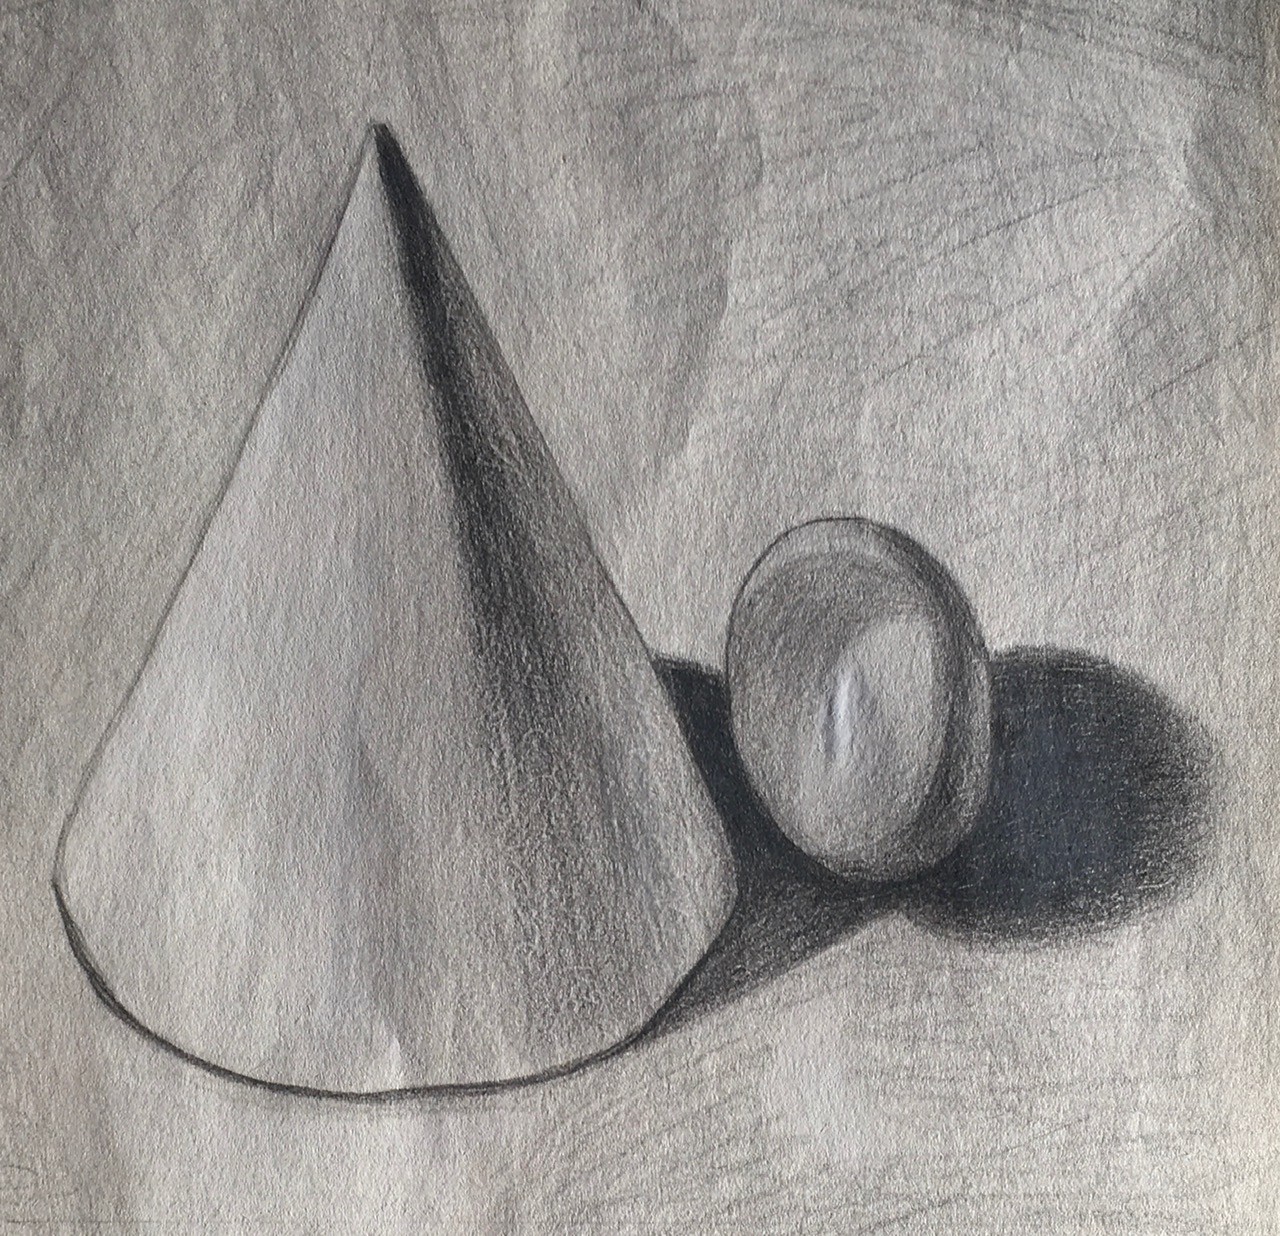 Cone and Egg, 2018
Pencil and White Colored Pencil on Paper
9"W x 8"H, Walli White, artist